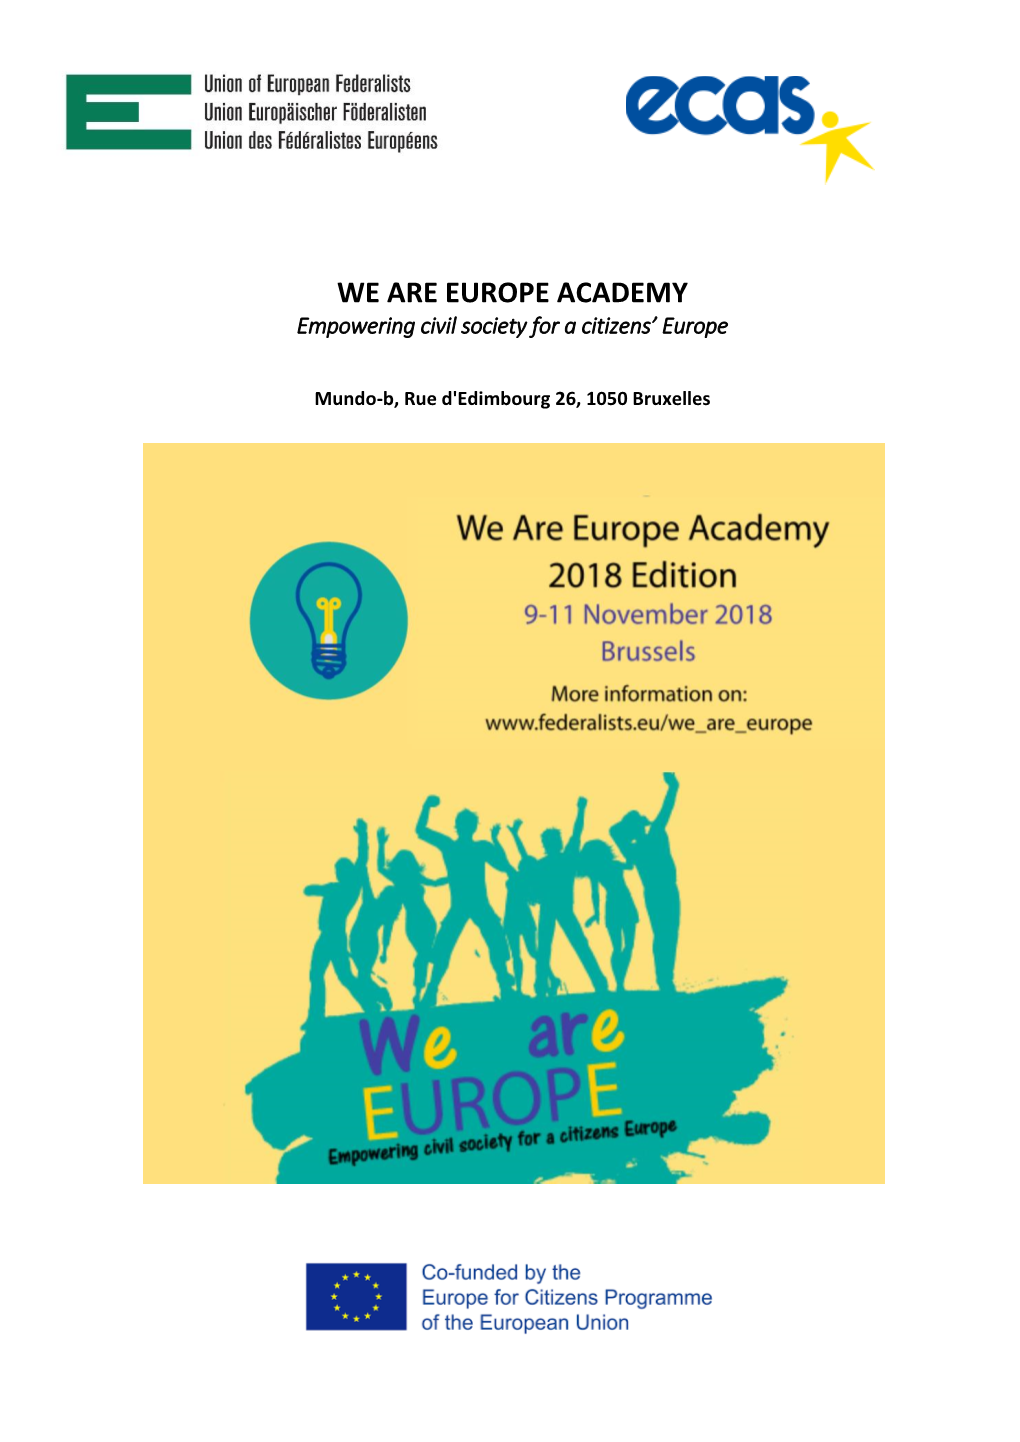 WE ARE EUROPE ACADEMY Empowering Civil Society for a Citizens’ Europe